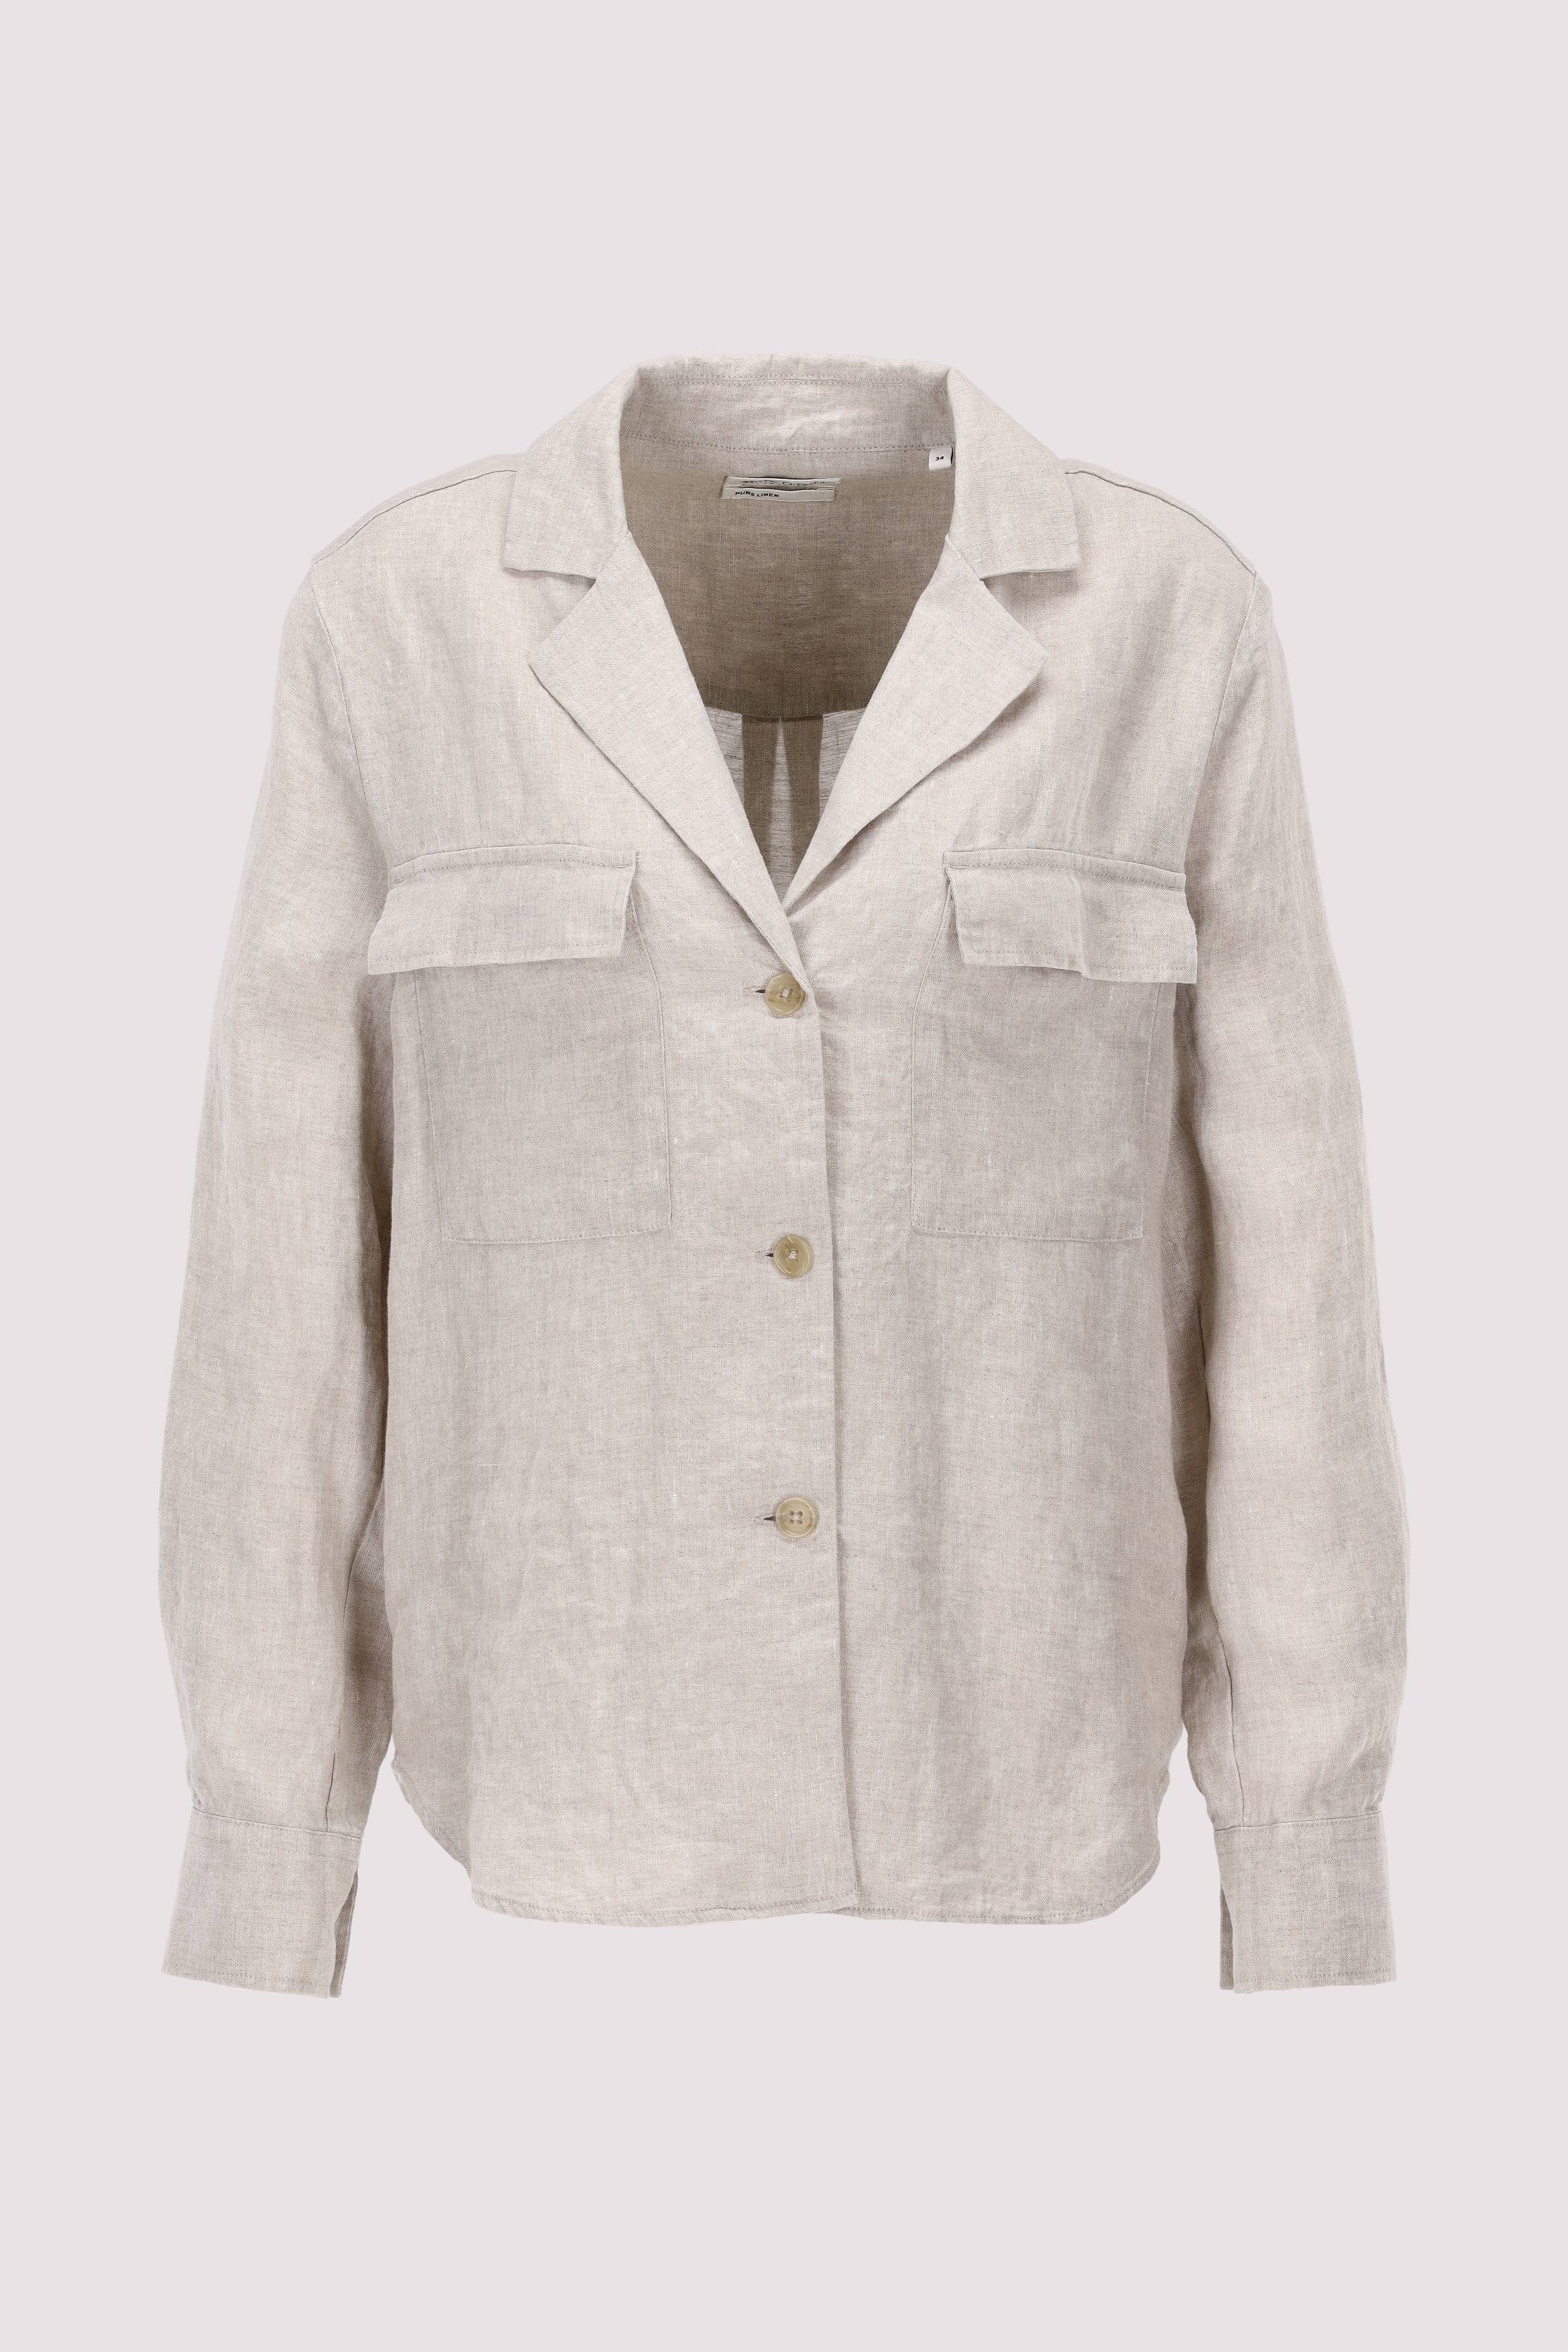 Overshirt, relaxed fit, long s